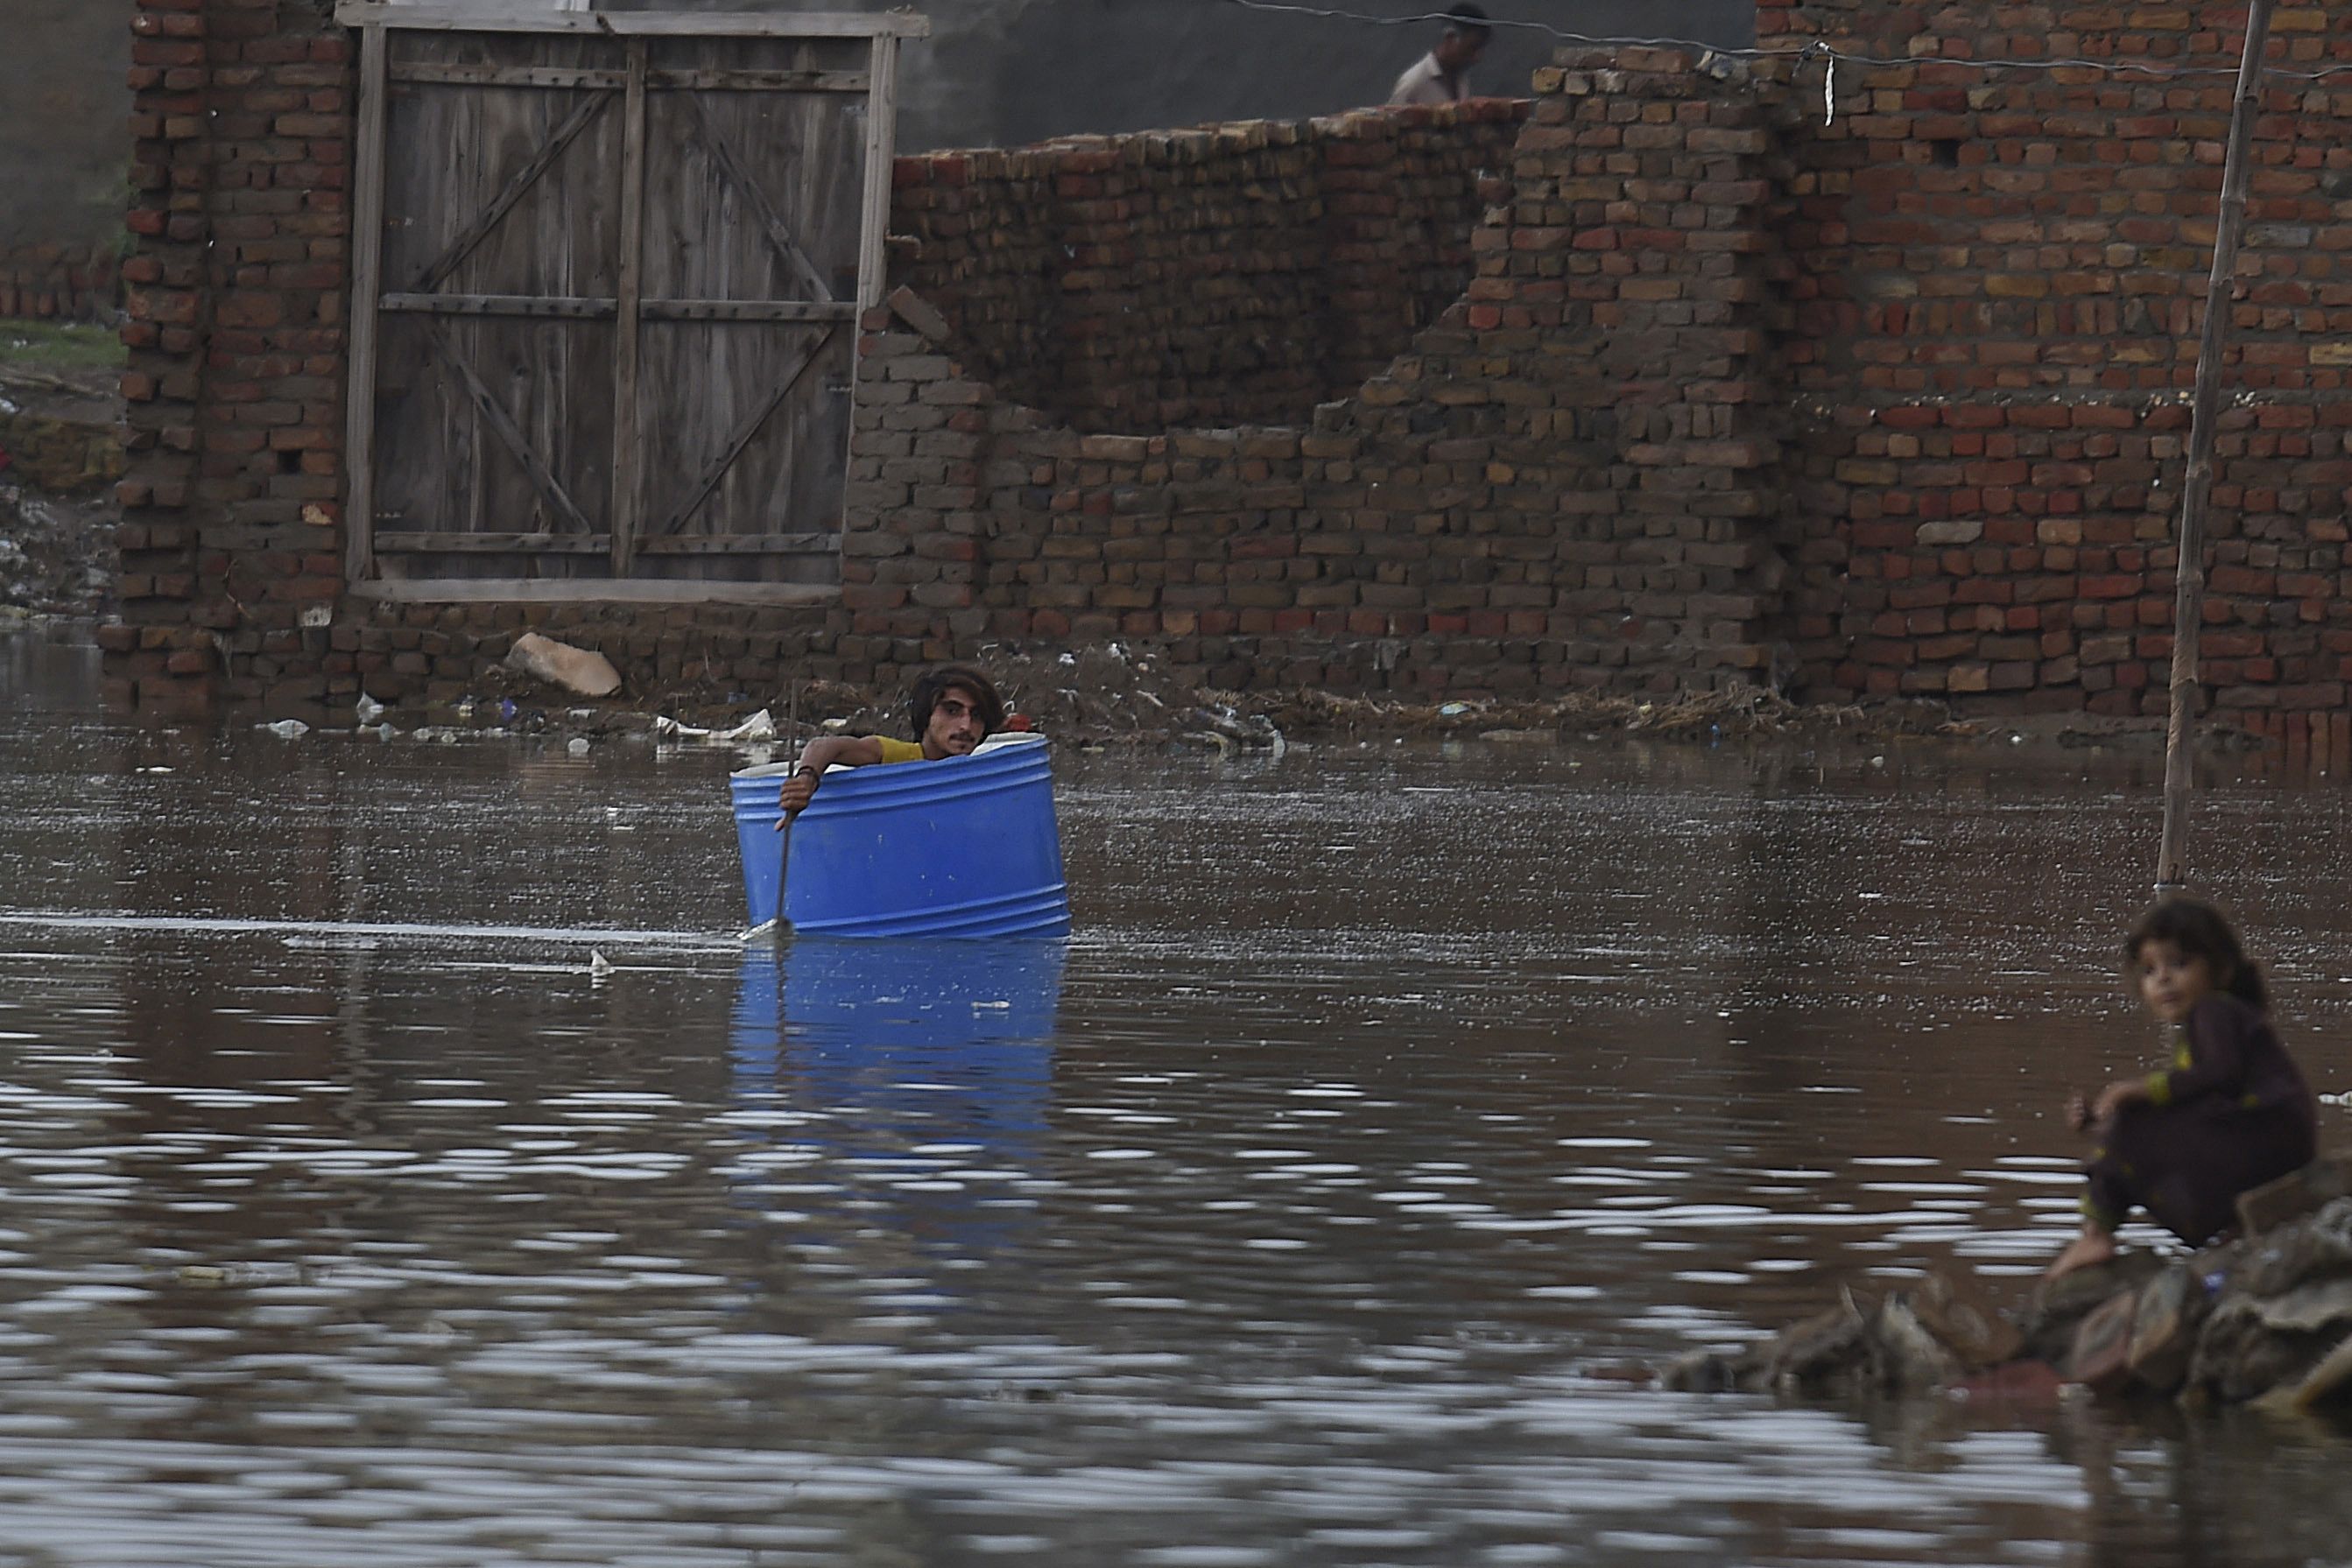 A man uses a plastic drum to cross a flooded area after heavy monsoon rains in Jacobabad, Sindh province, on August 26.